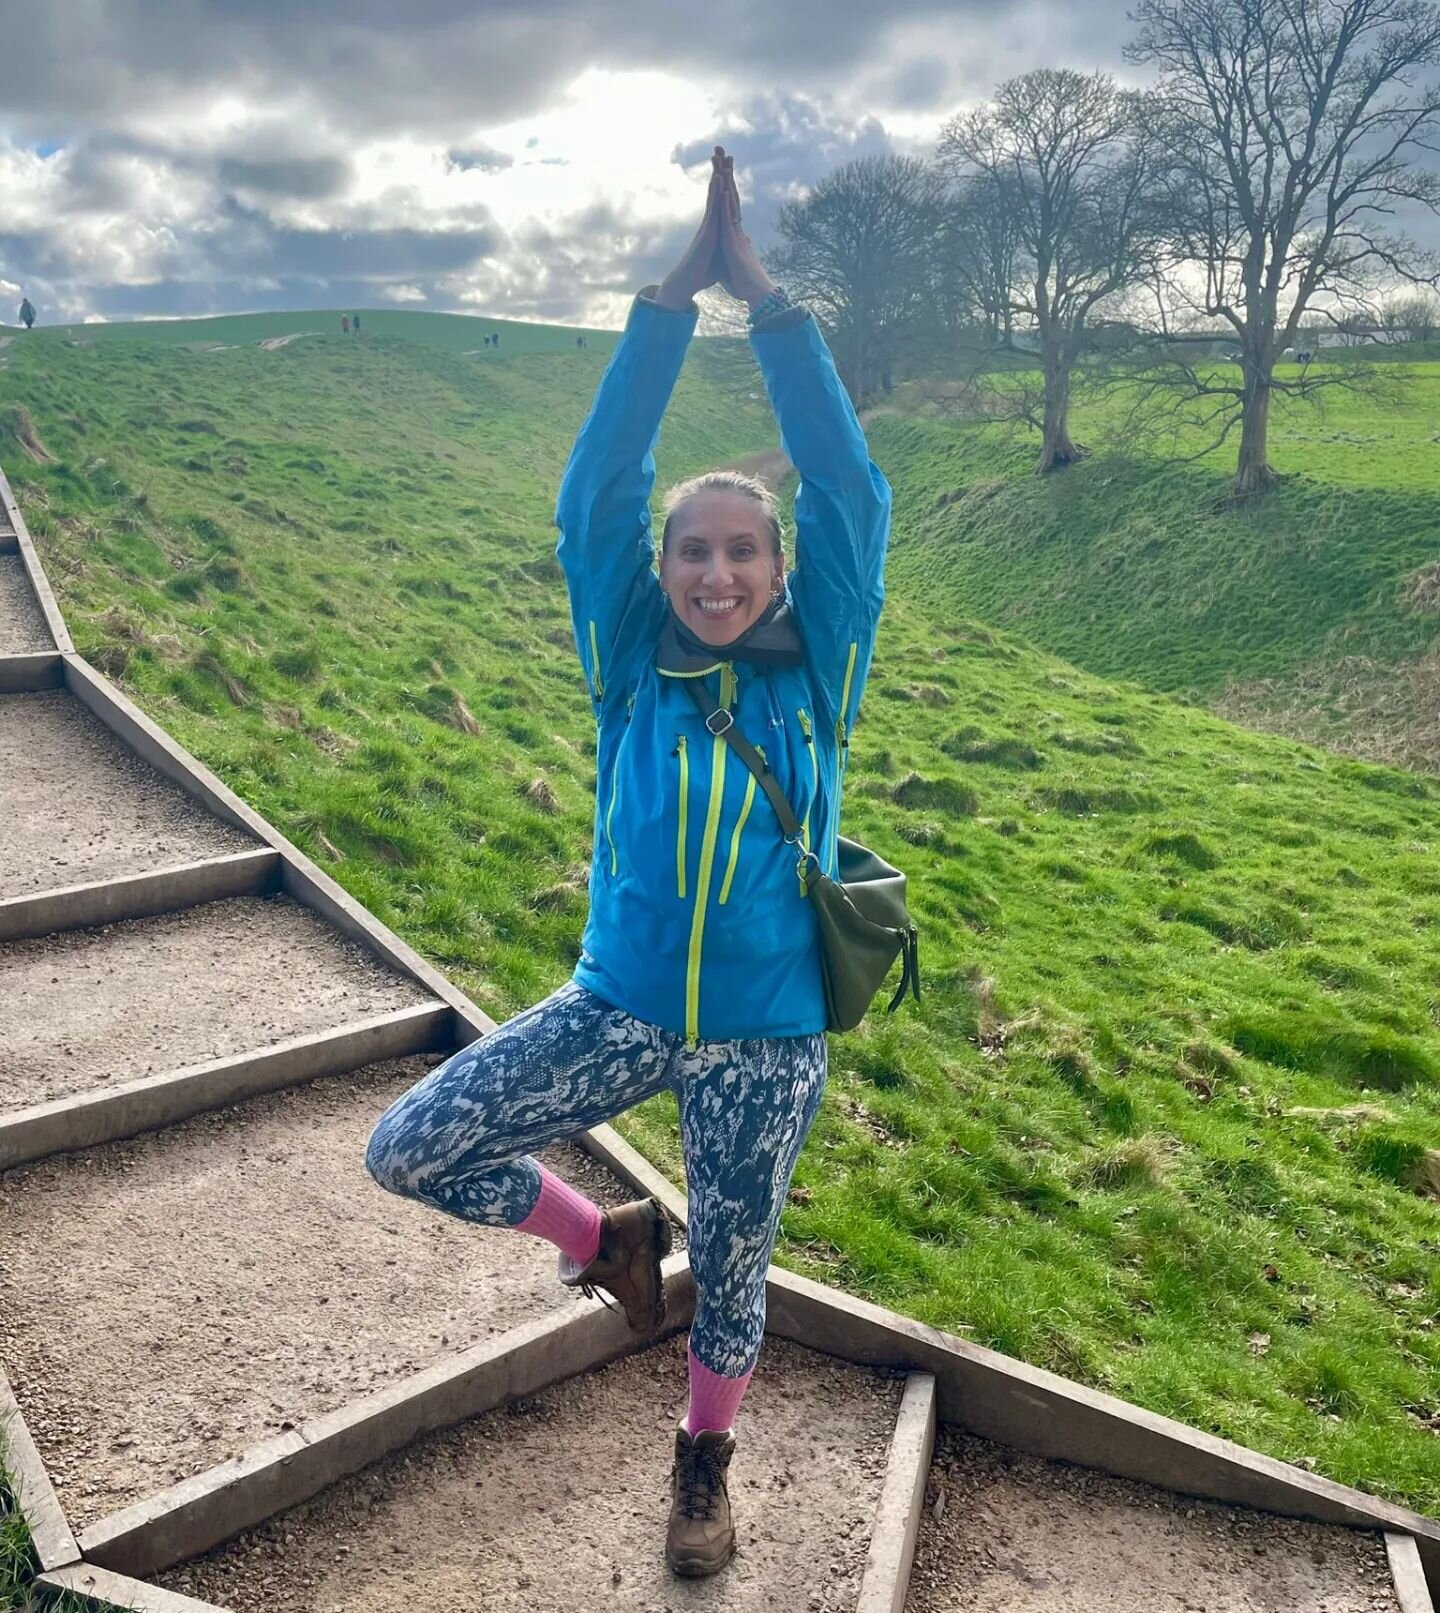 ✨️Back from an incredible Yoga &amp; Sound Healing Weekend Retreat, which I have hosted and now to get back on the mat with you all yogis.✨️

Let's all be Fabulous and Empowered together. Life is for living and not for regretting.

This week is about